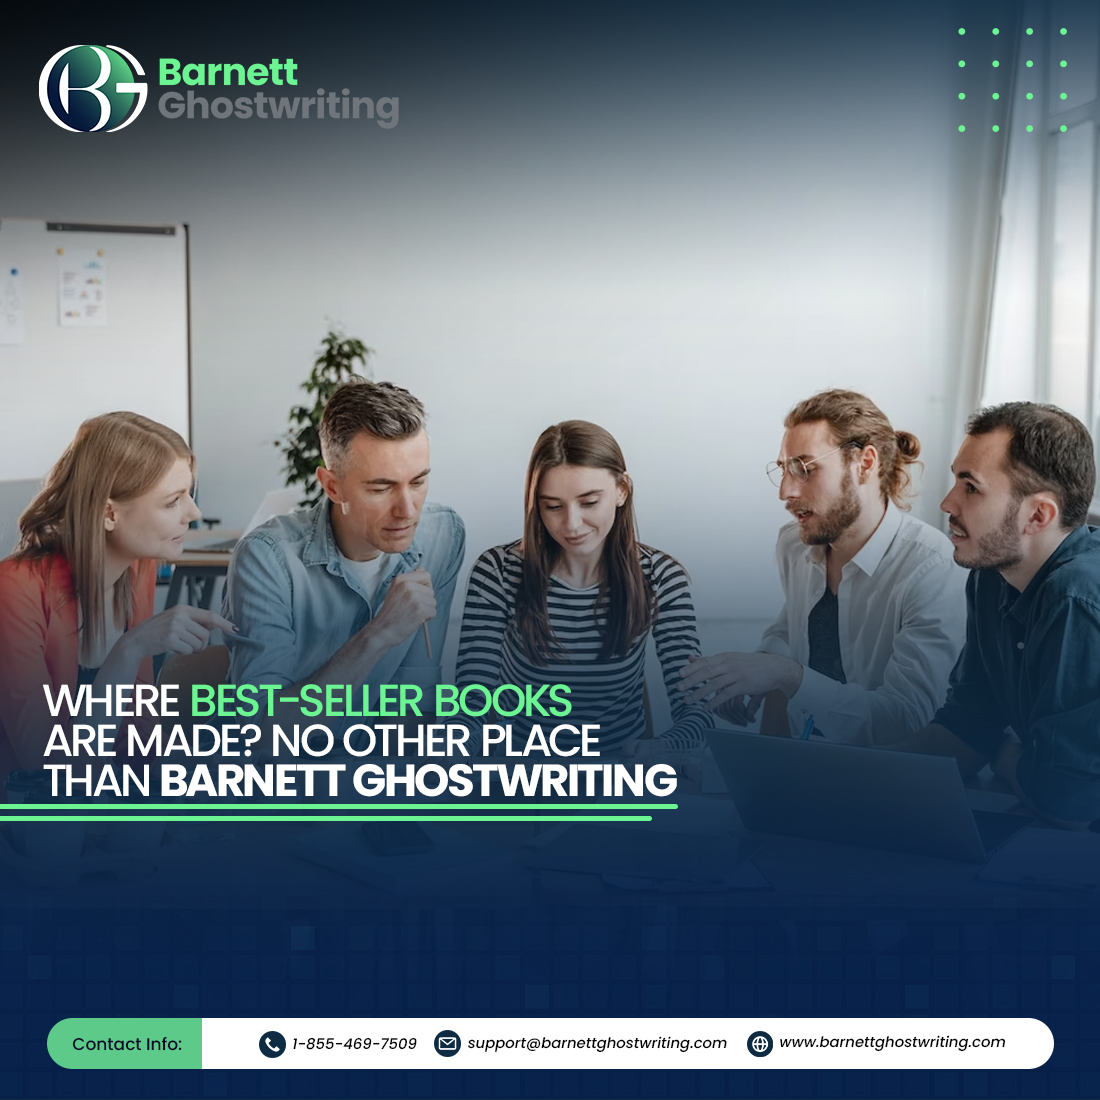 Barnett Ghostwriting makes books that sell far and wide. Looking for your next great book? Contact us now.

#BarnettGhostwriting #bestseller #bestsellerbooks #bookwriting #ghostwriting